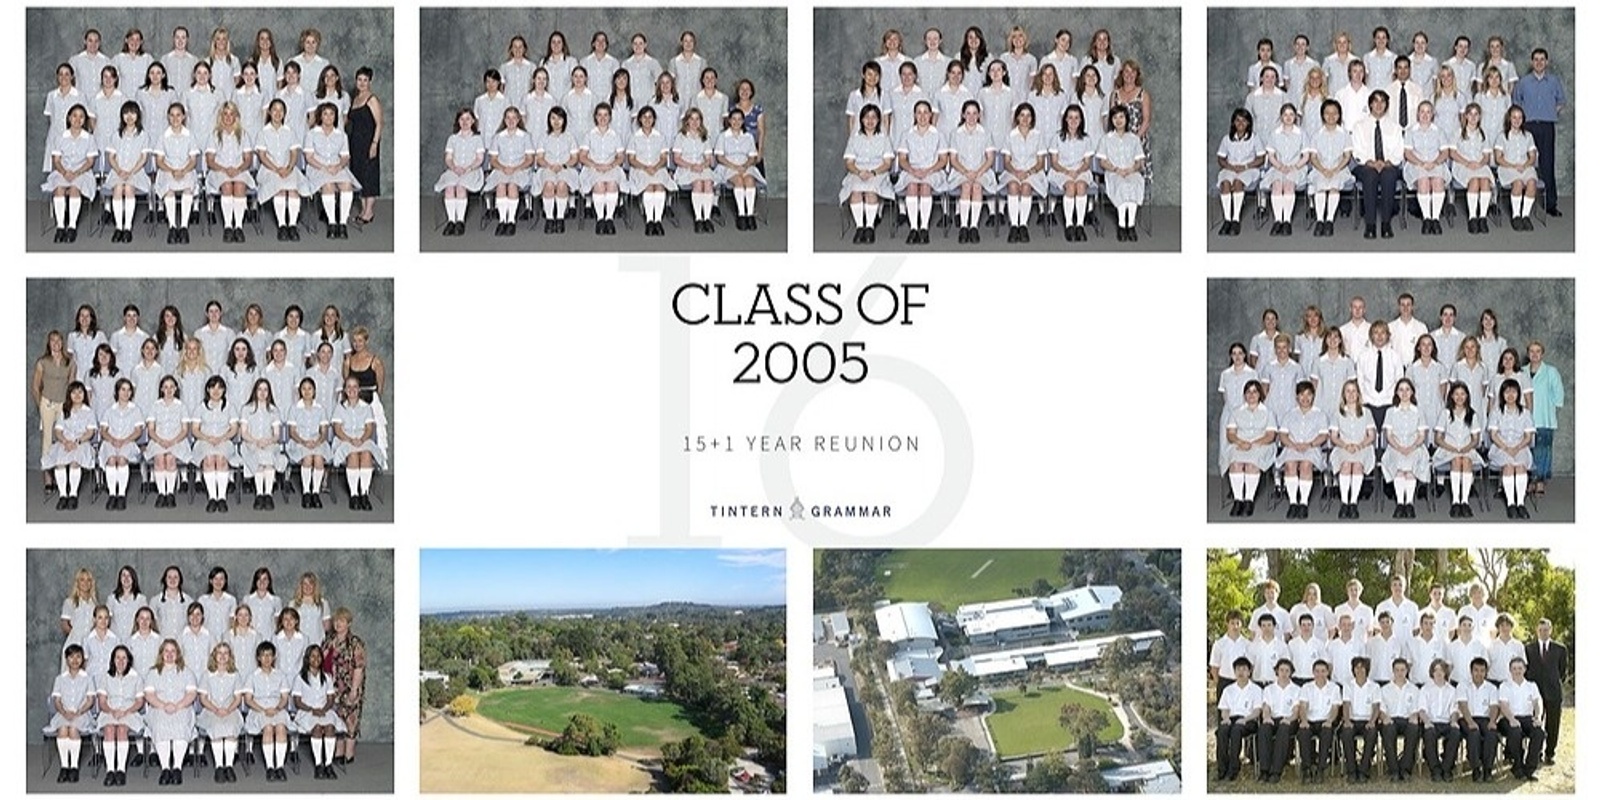 Banner image for Class of 2005 - 15+1 Year Reunion